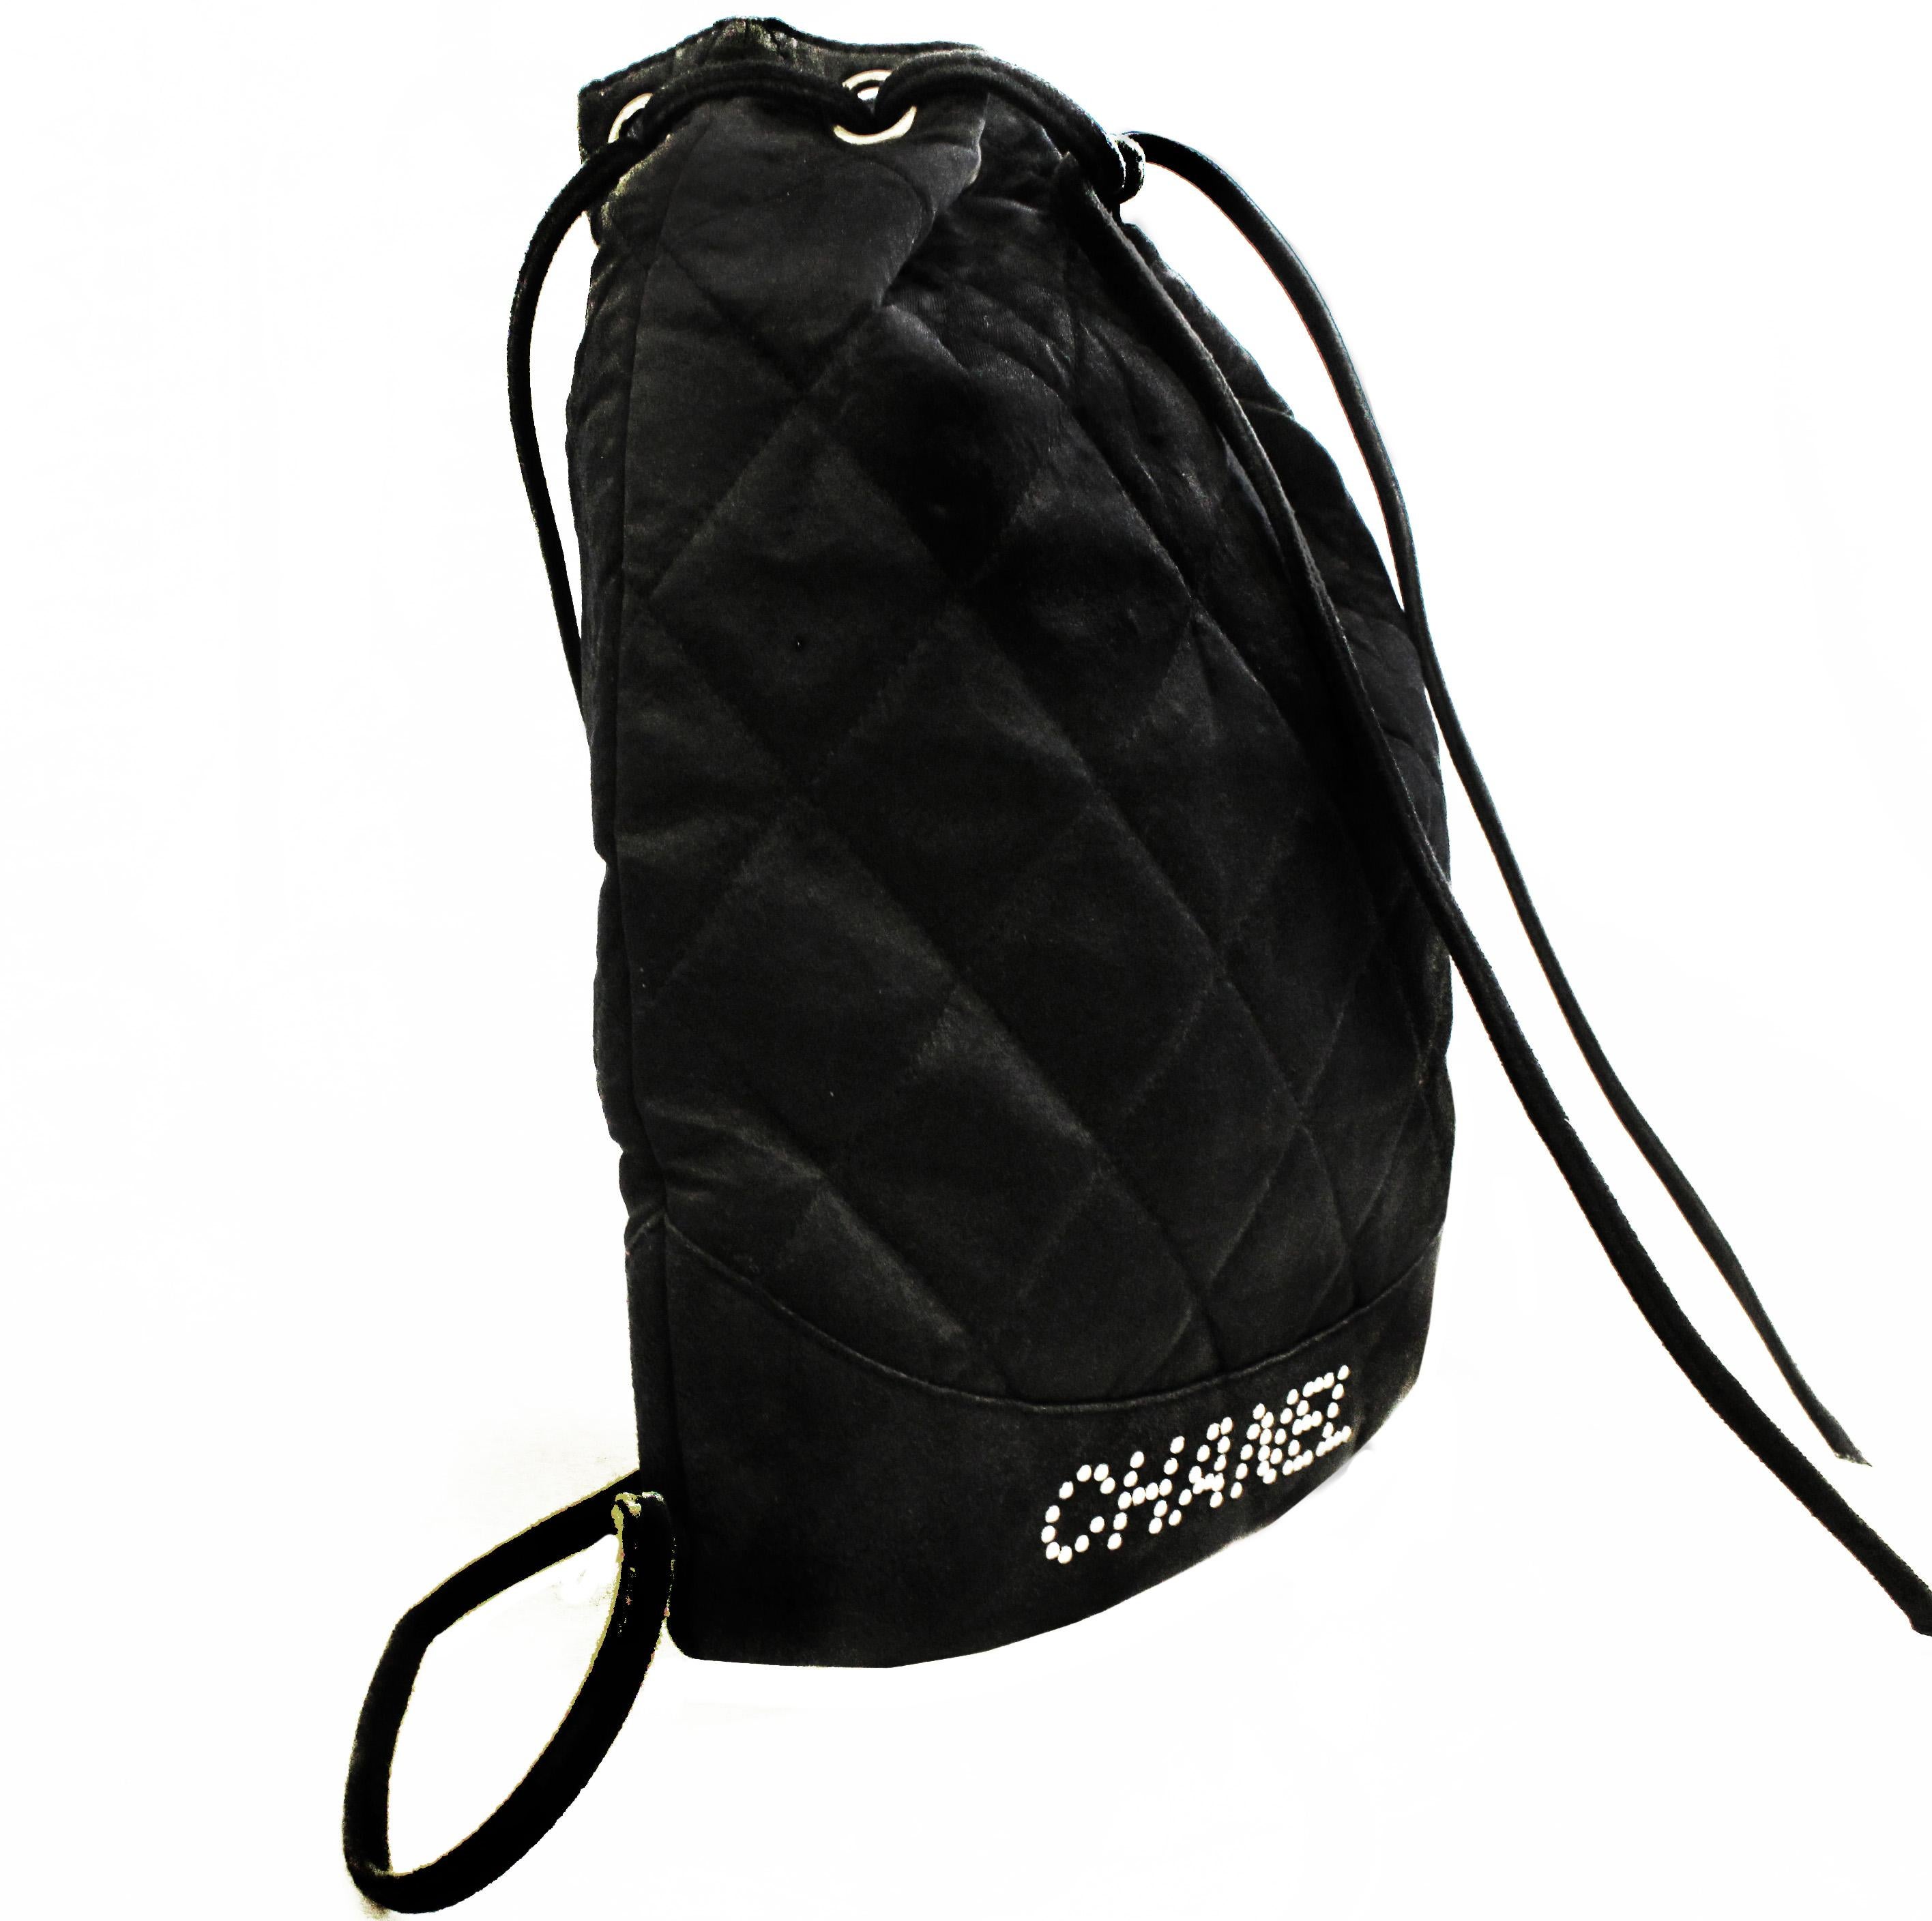 This rarely found Chanel black satin drawstring mini backpack incorporates a black suede leather band at the bottom for extra support. On the suede band the Chanel name is accentuated with mini faux pearls.  It's light weight and very feminine